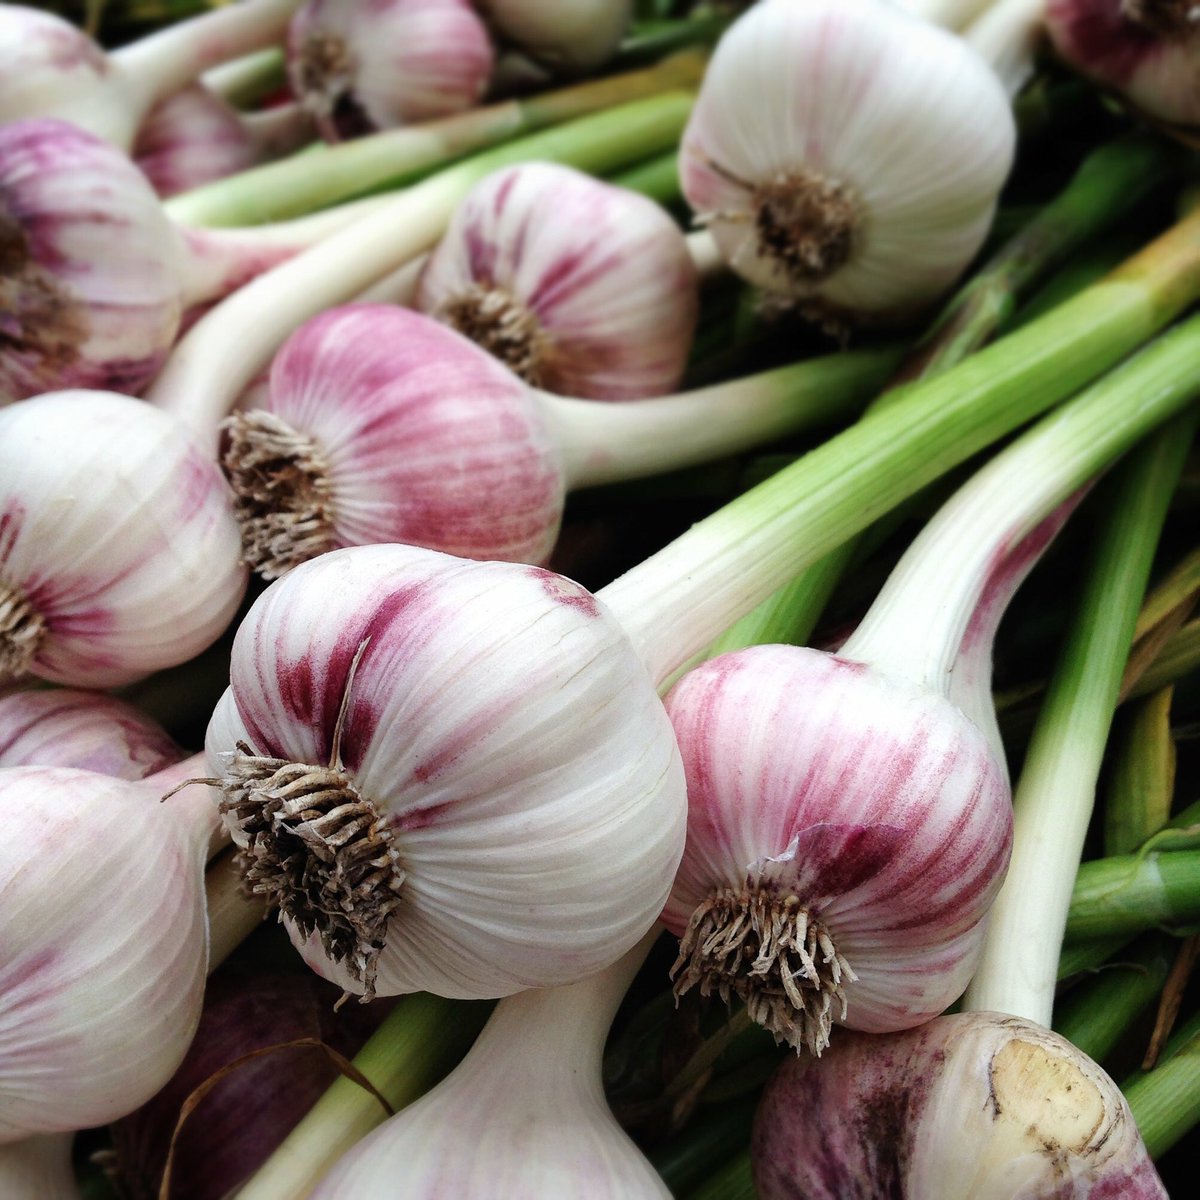 An exciting thing is happening at tomorrow's market: The Garlic Garden is returning with freshly harvested Saskatchewan grown garlic! Make fresh, locally grown garlic the secret ingredient in your kitchen and prepare your taste buds for a burst of flavour!